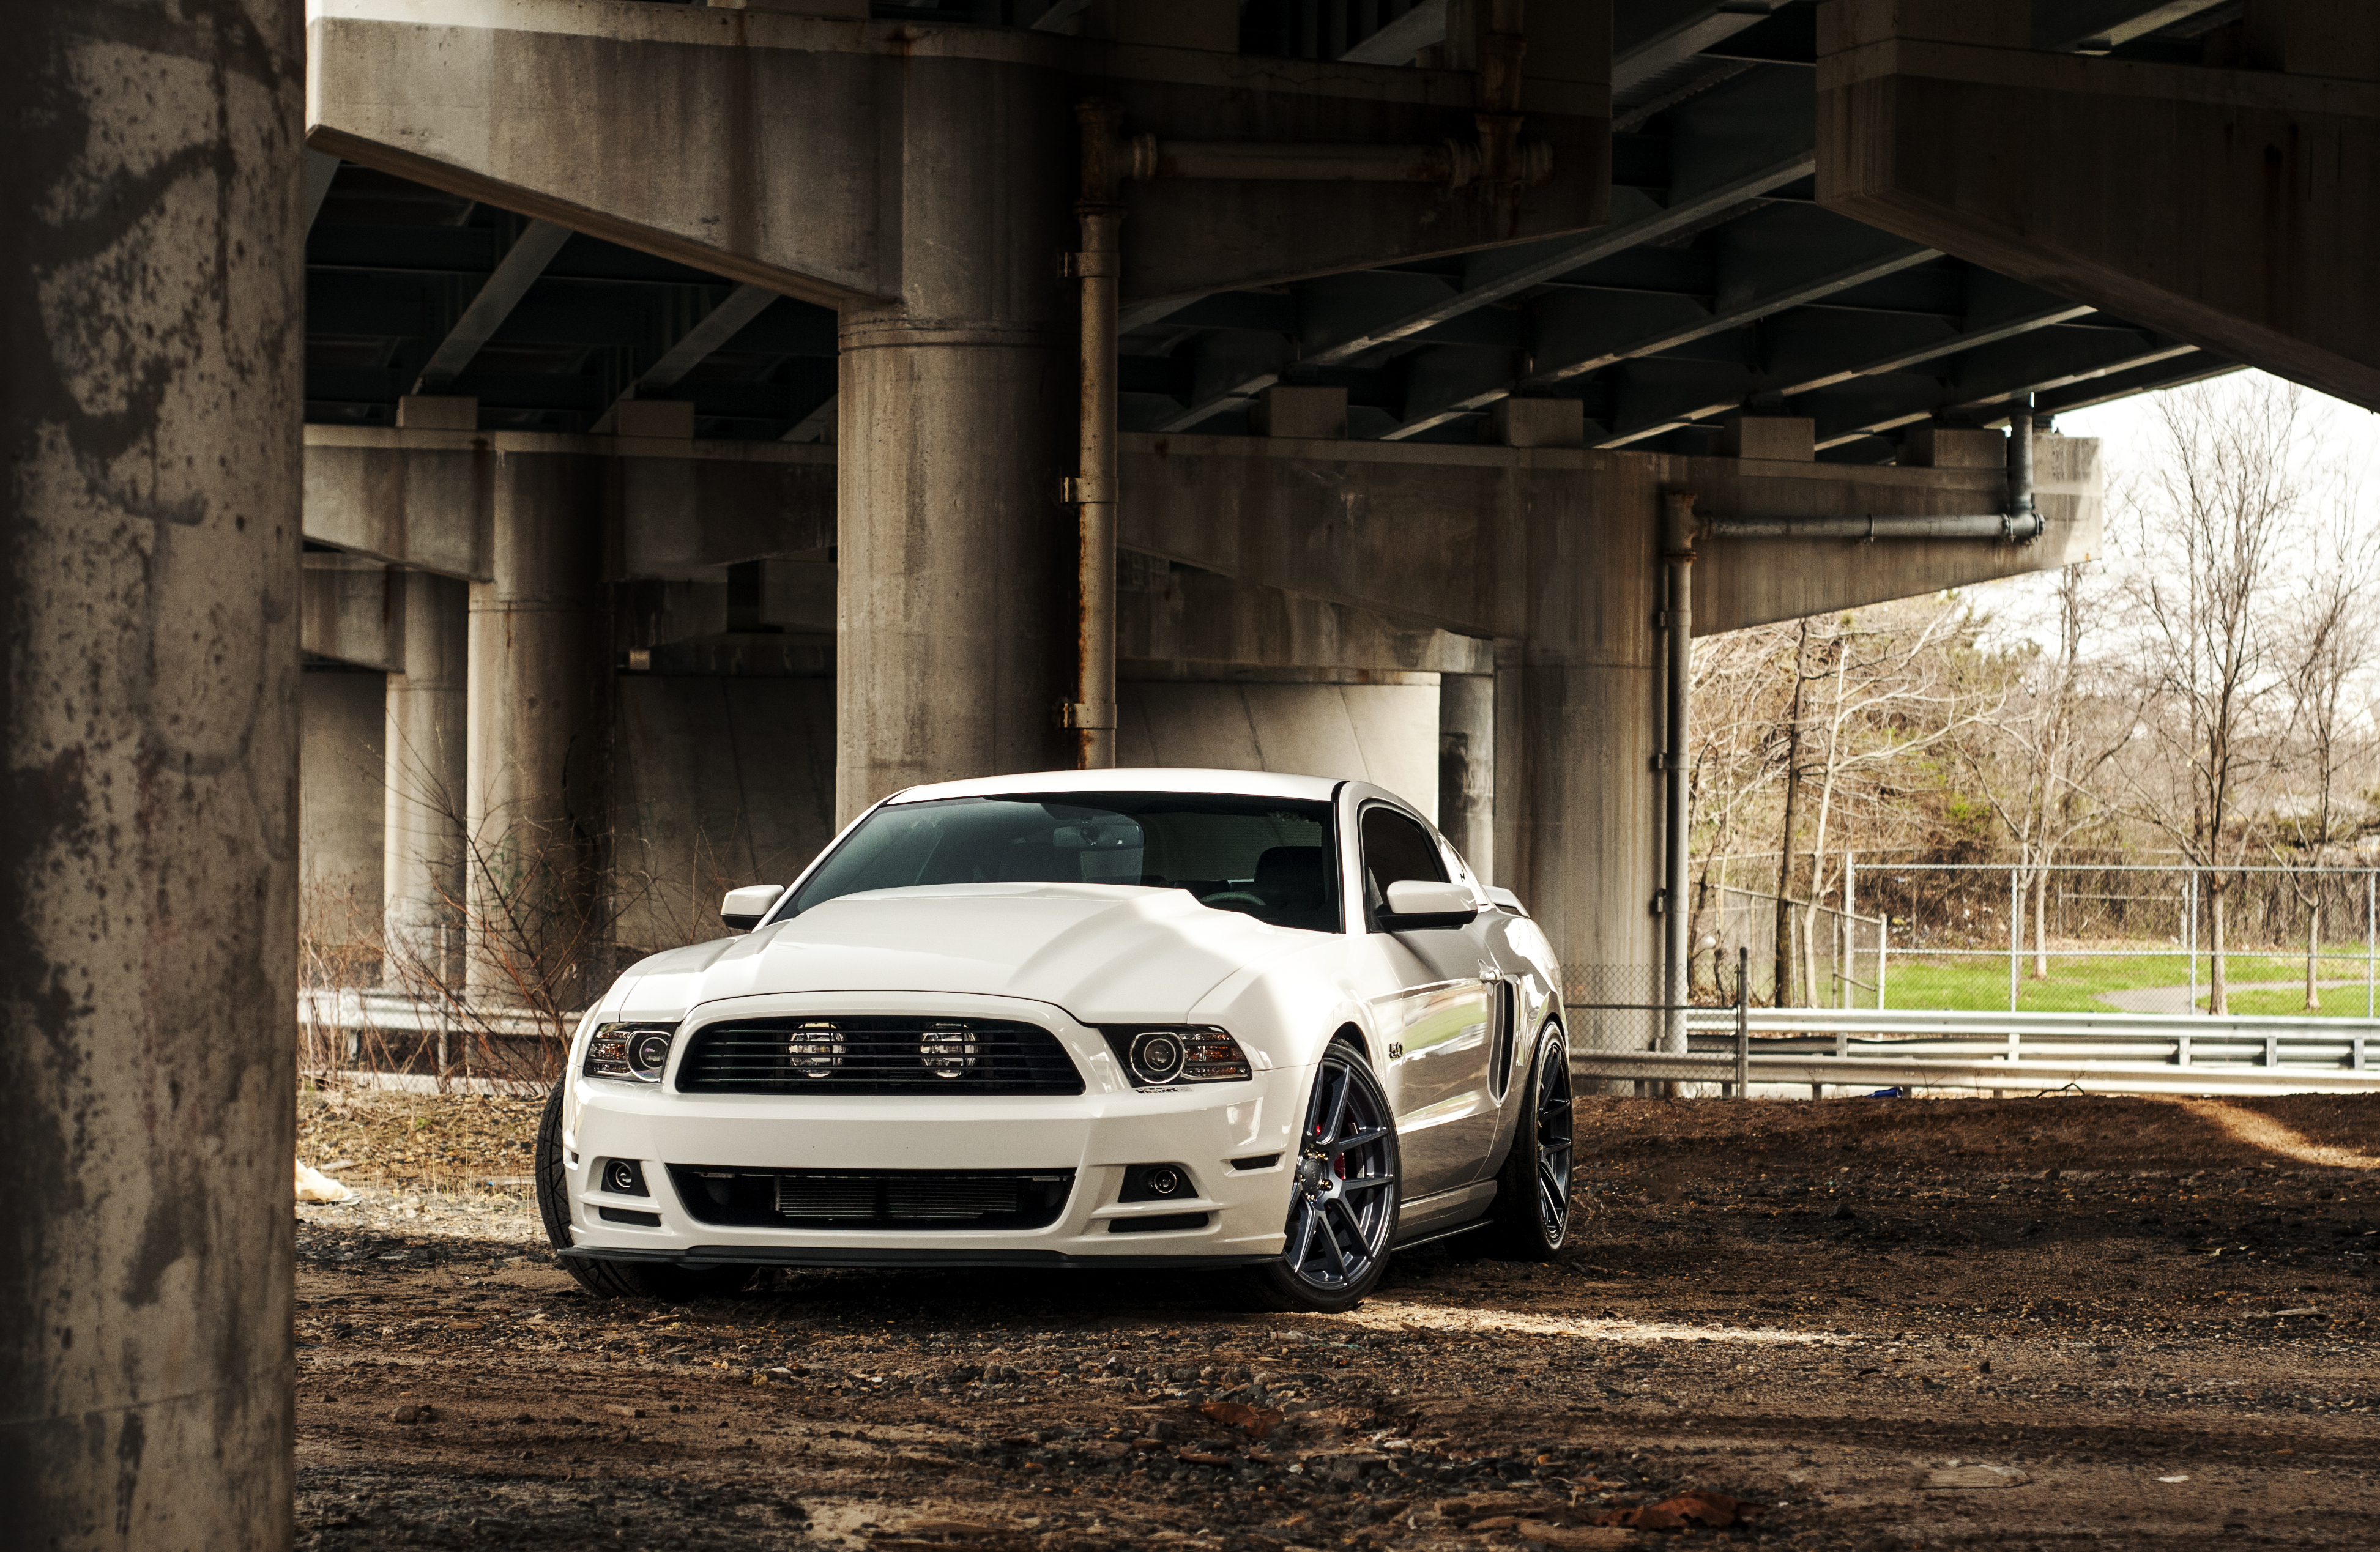 ford, ford mustang, vehicles